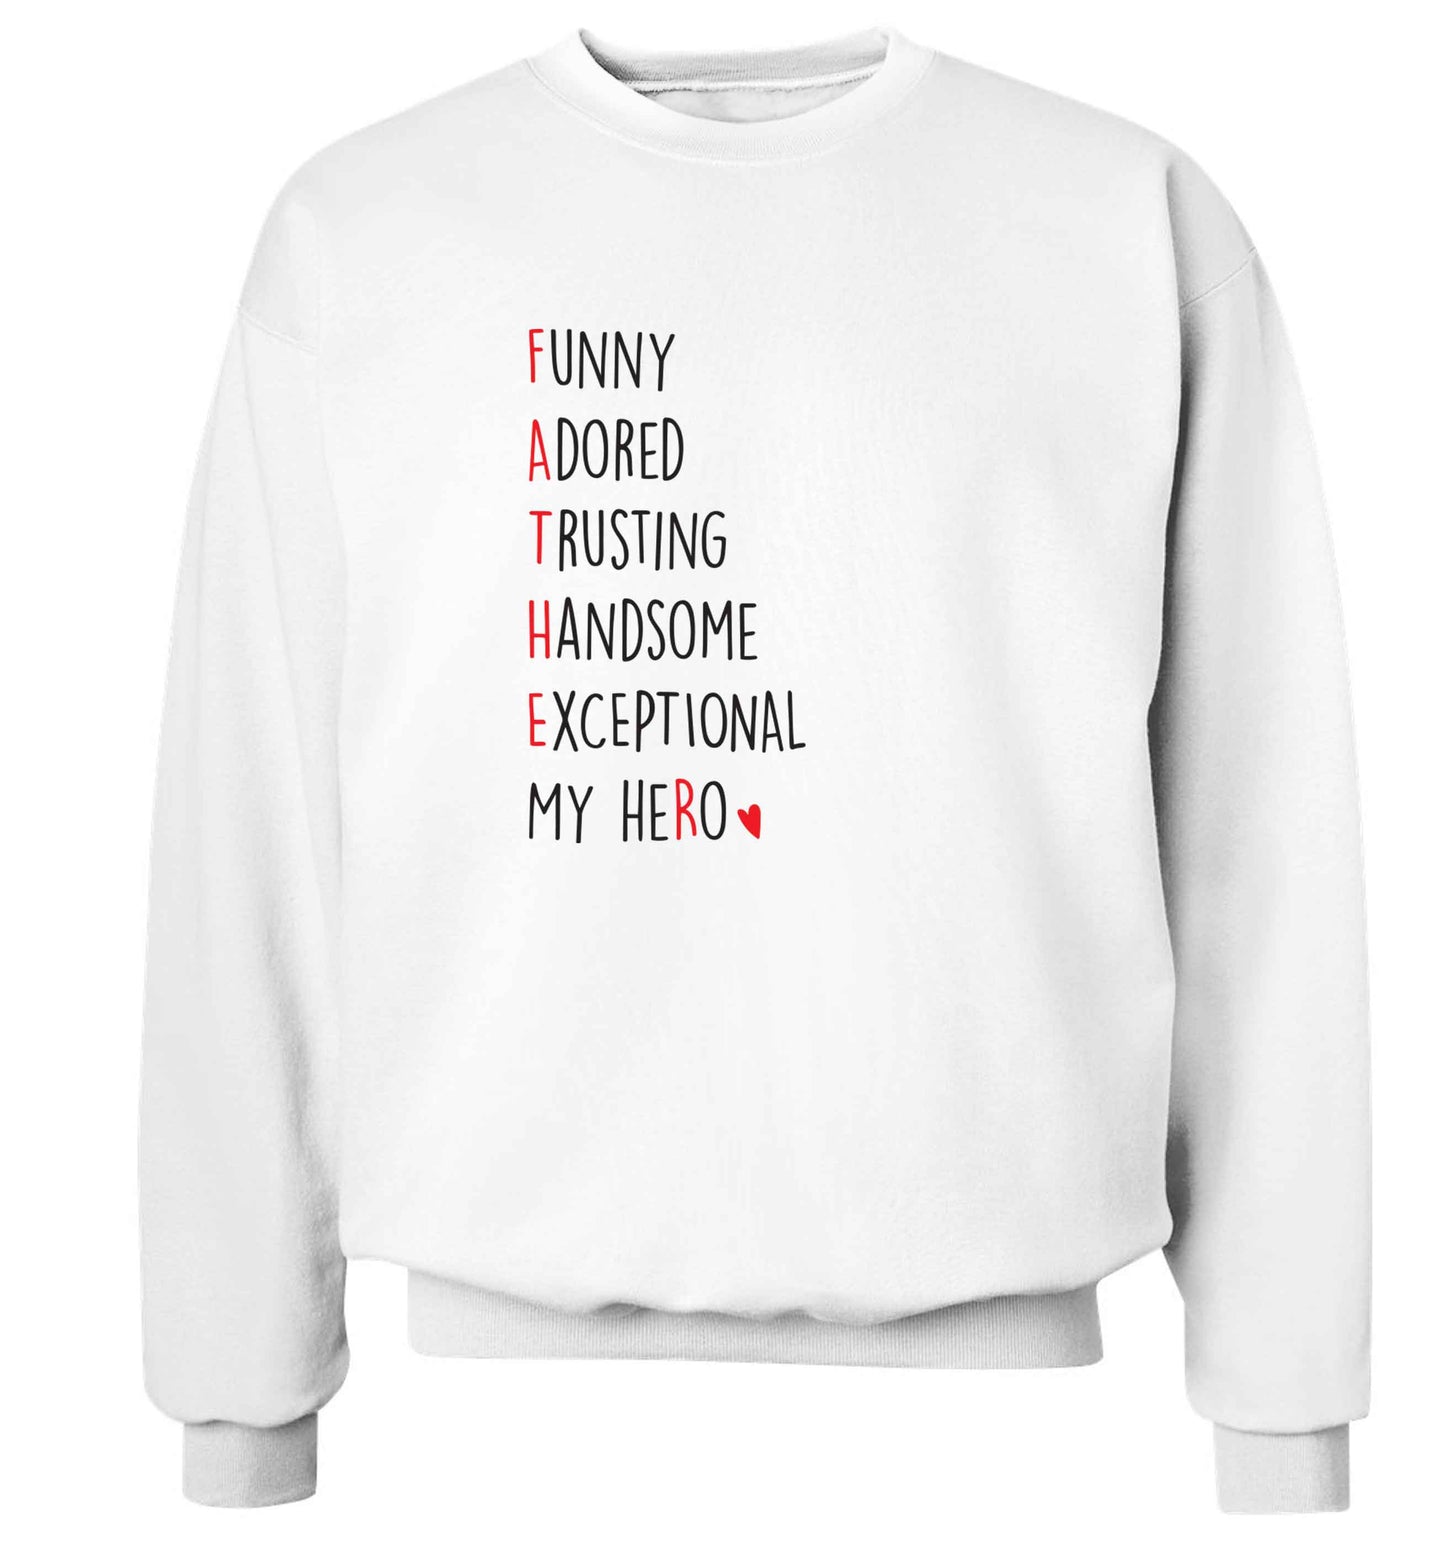 Father, funny adored trusting handsome exceptional my hero adult's unisex white sweater 2XL